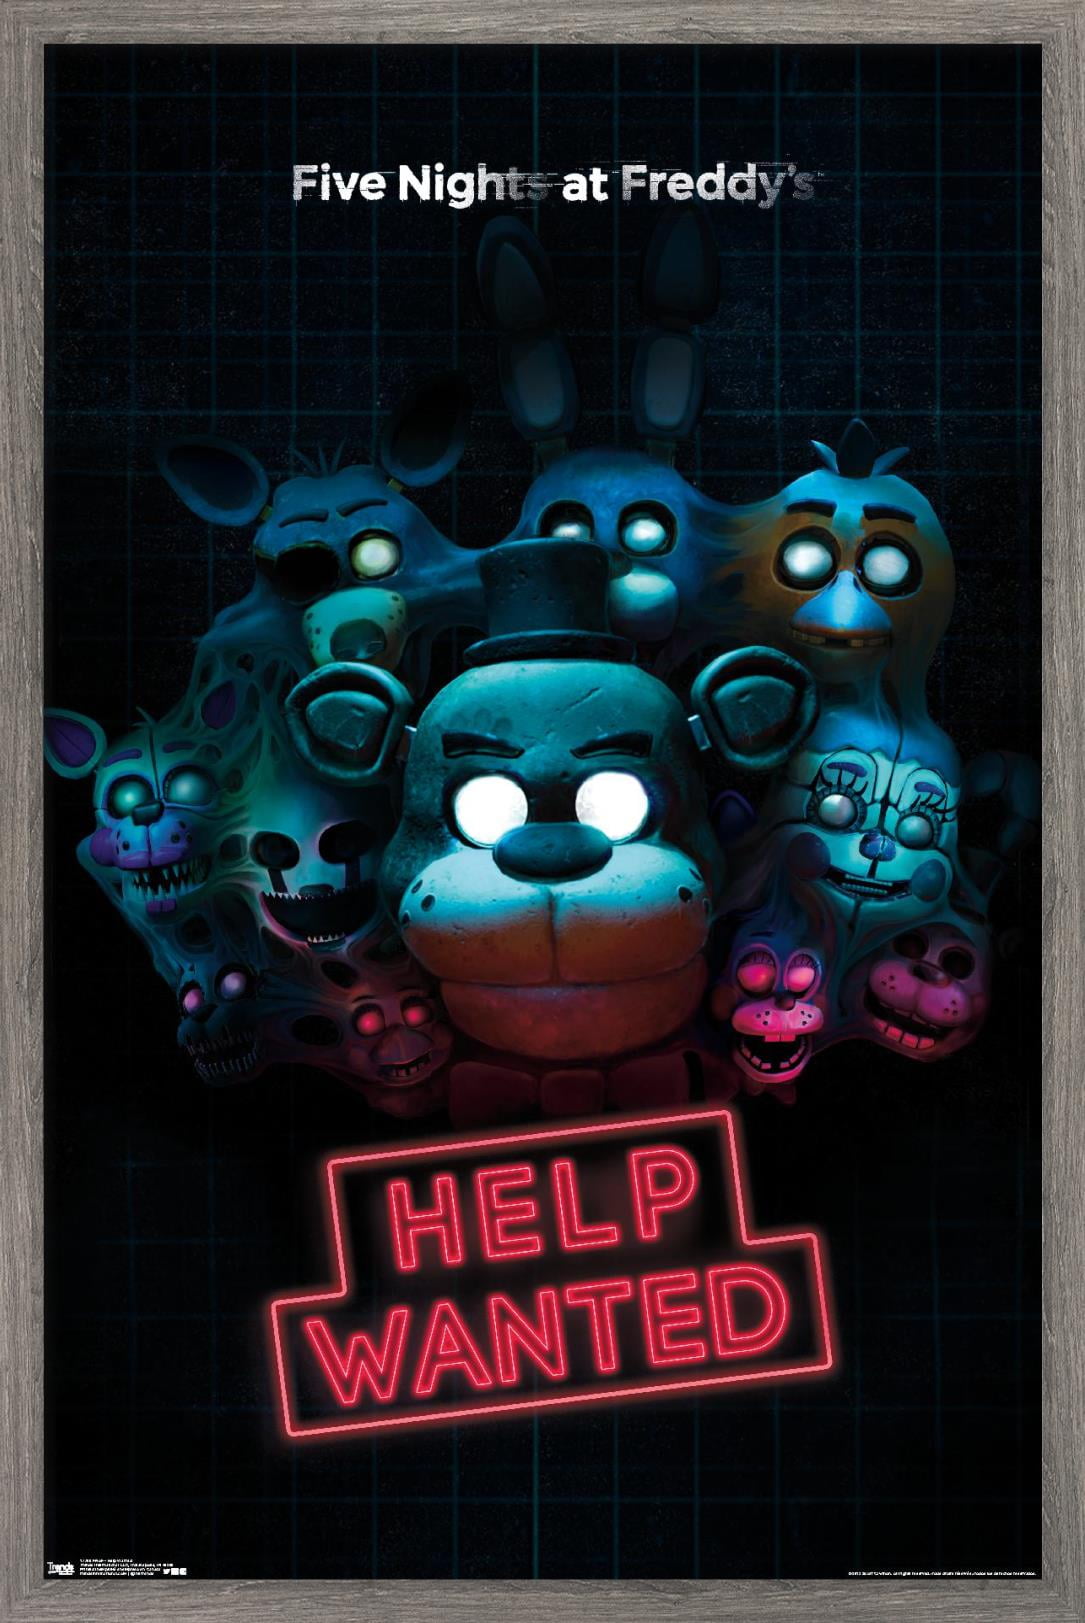 Five Nights at Freddy's Illustration, five nights at freddy's poster, png